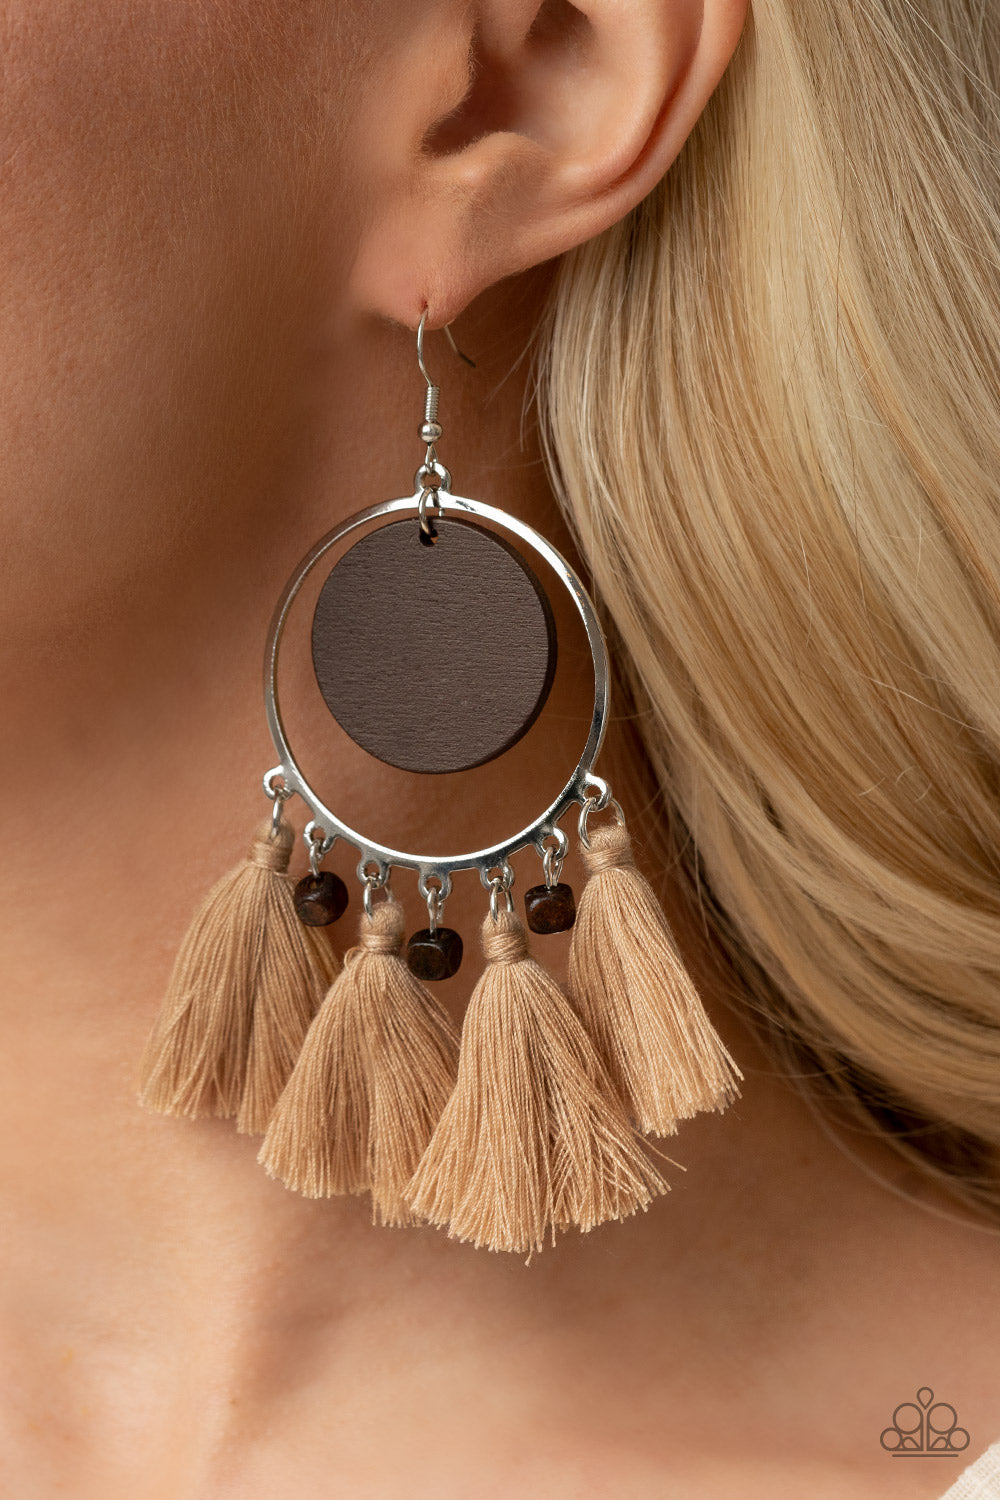 Paparazzi Yacht Bait - Brown Earrings - A Finishing Touch Jewelry